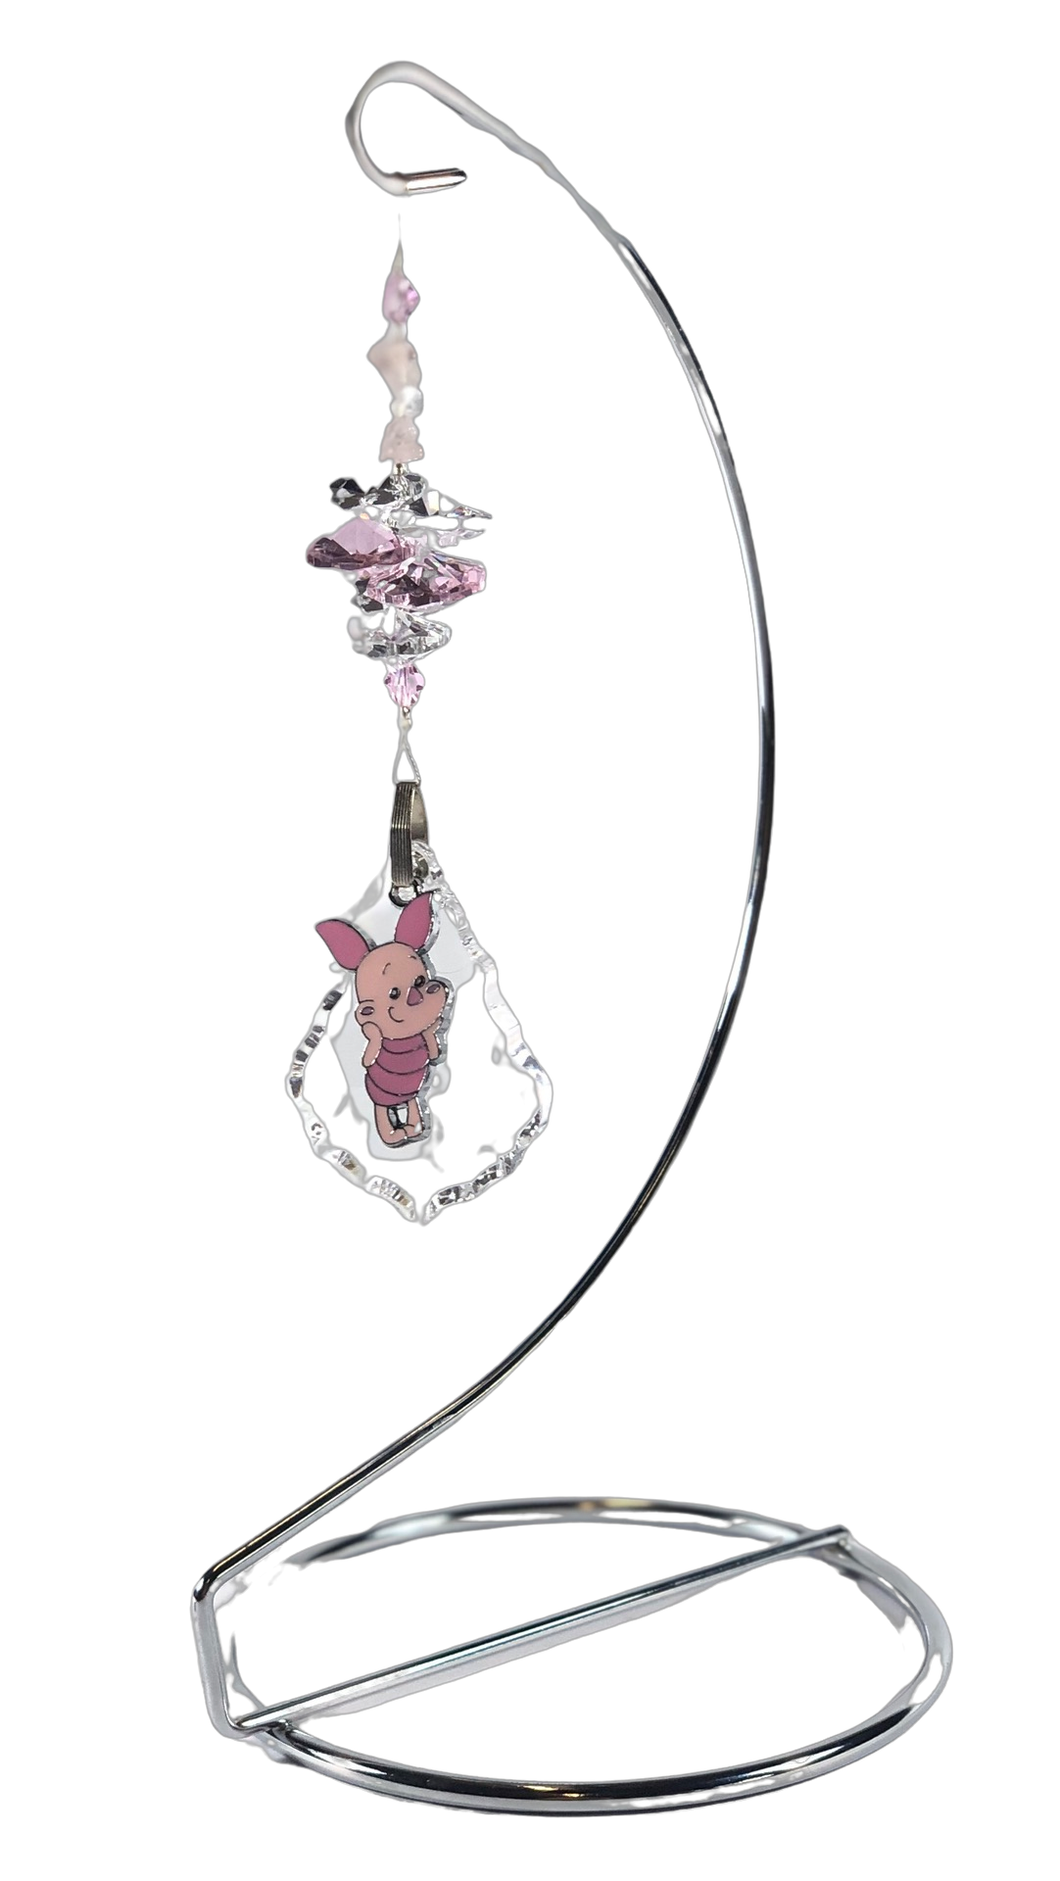 Winnie The Pooh - Piglet crystal suncatcher is decorated with rose quartz gemstones and come on this amazing stand.